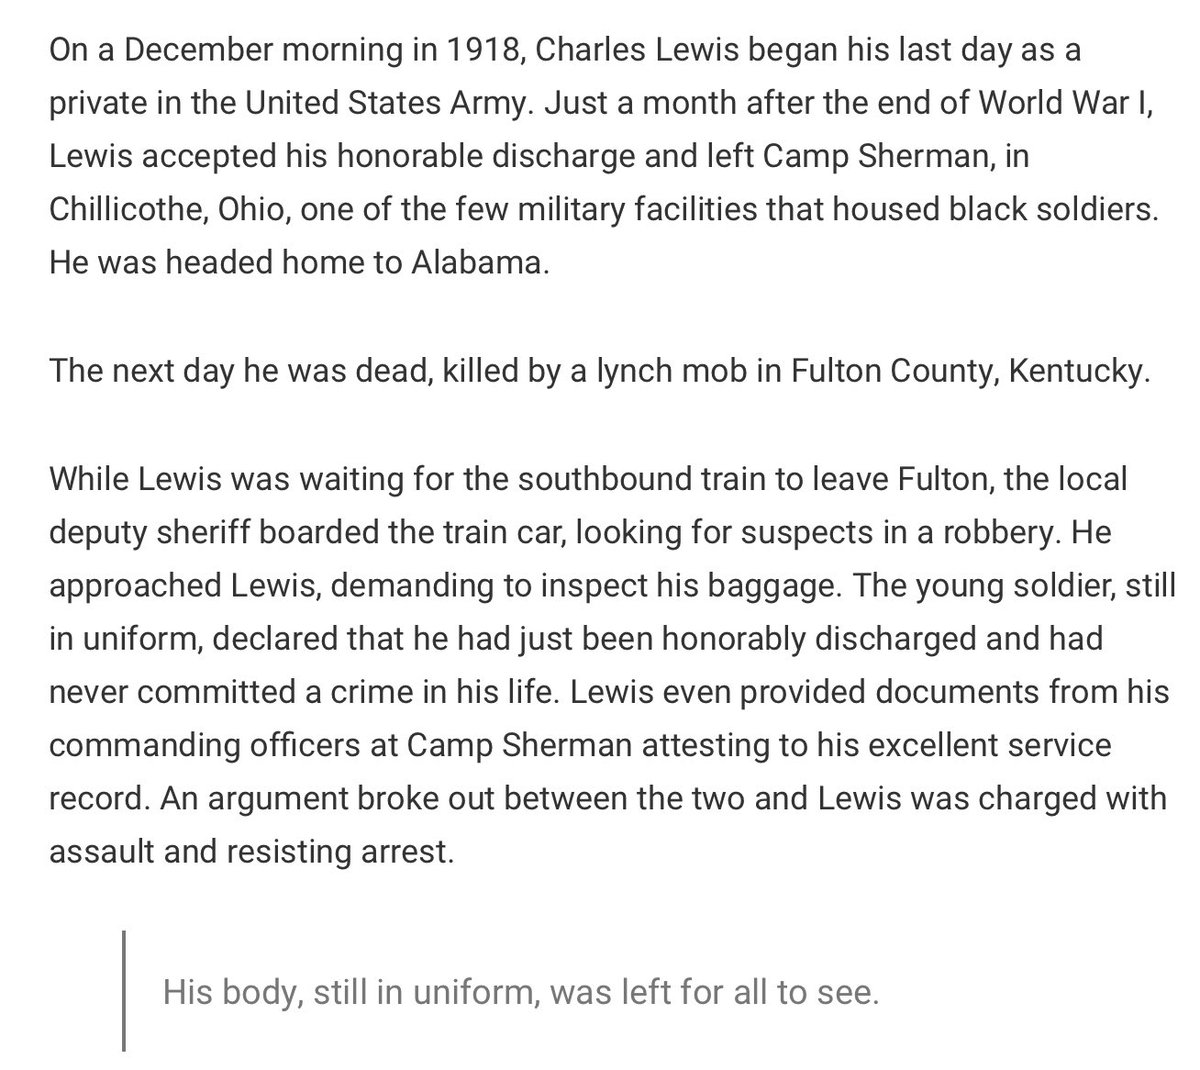 But then black soldiers fought for freedom in WWII so cops started acting better right? Let’s look at what happened: